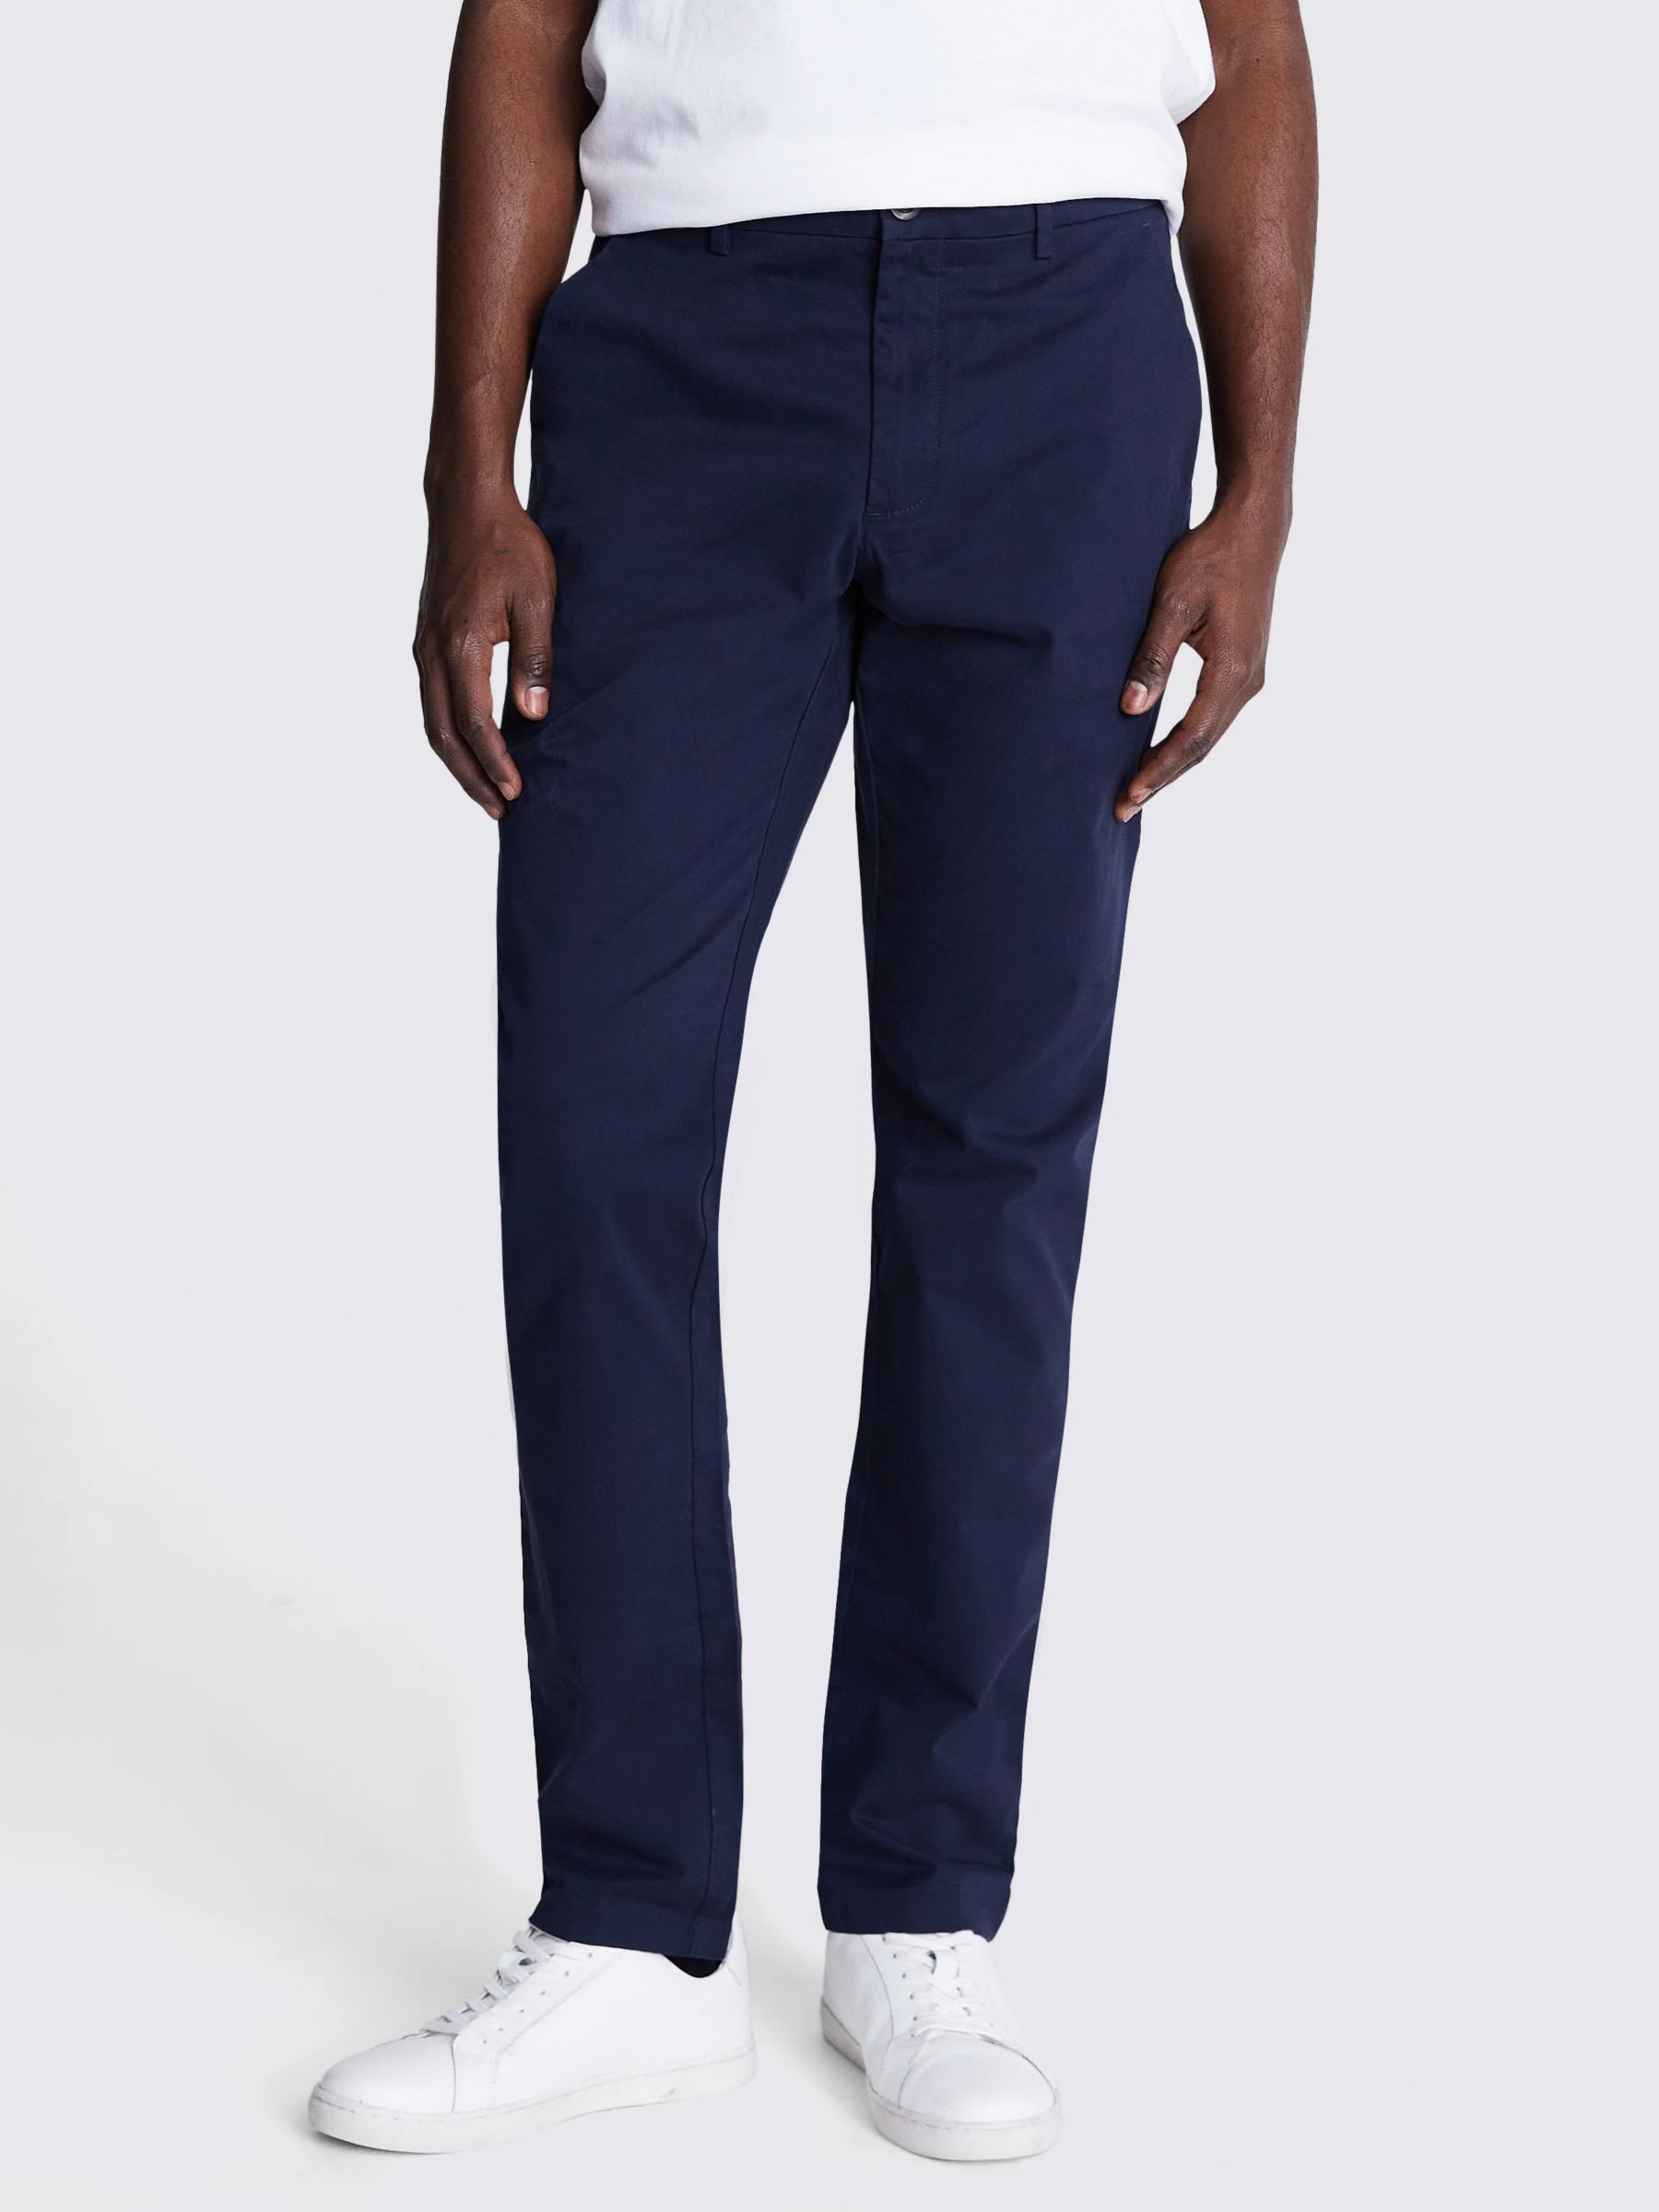 Moss Tailored Stretch Chinos, Navy, 30R